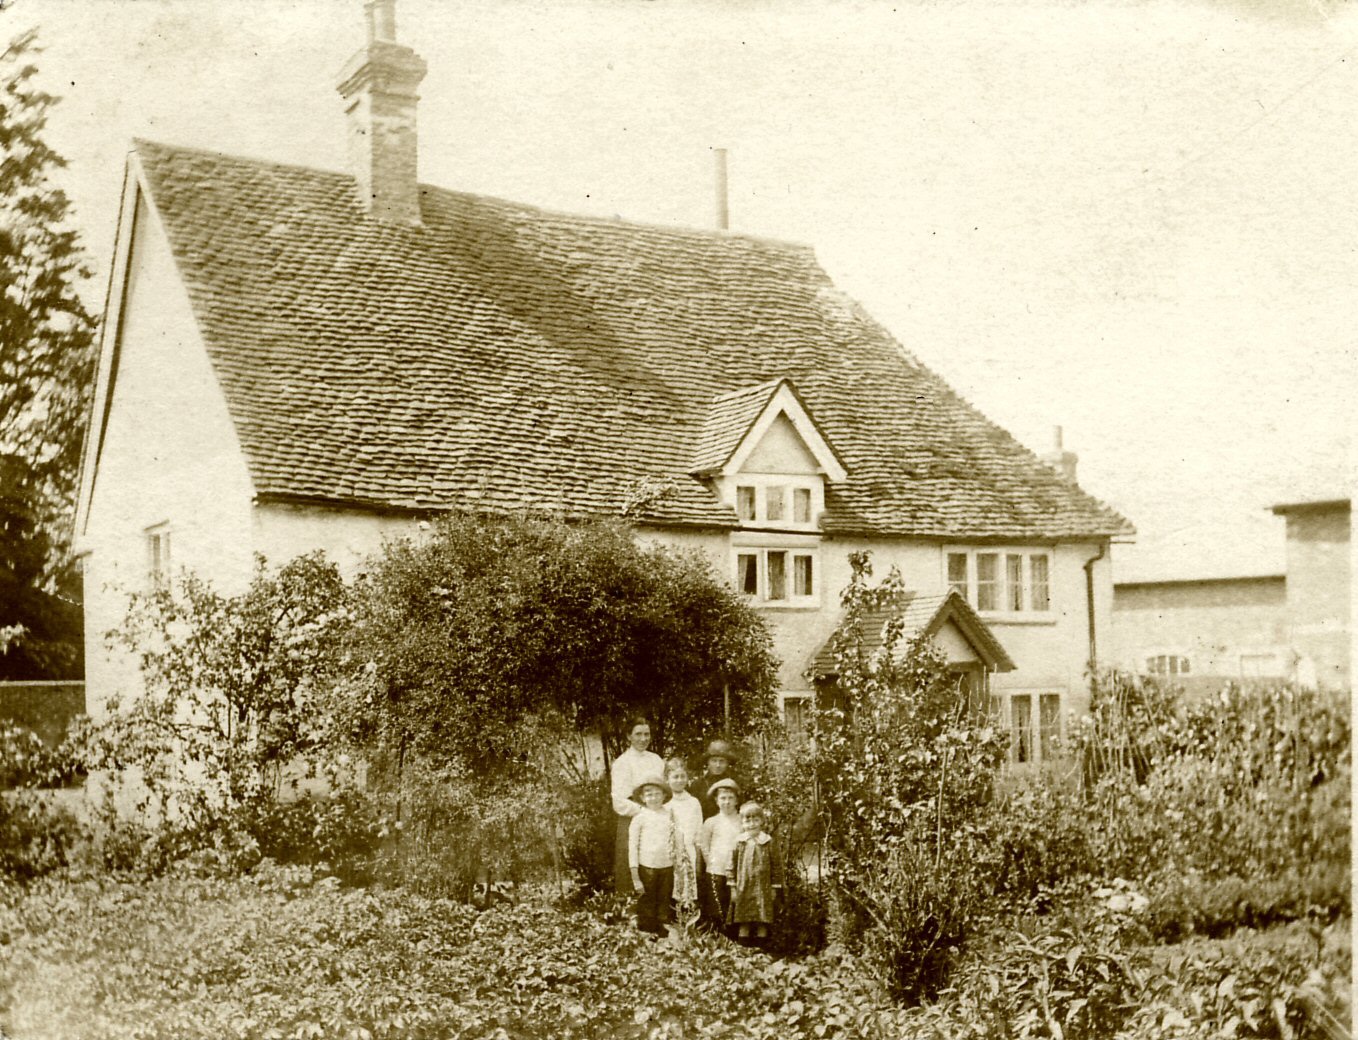 A black and white photograph of an old cottage with a woman and five children standing outside its door.